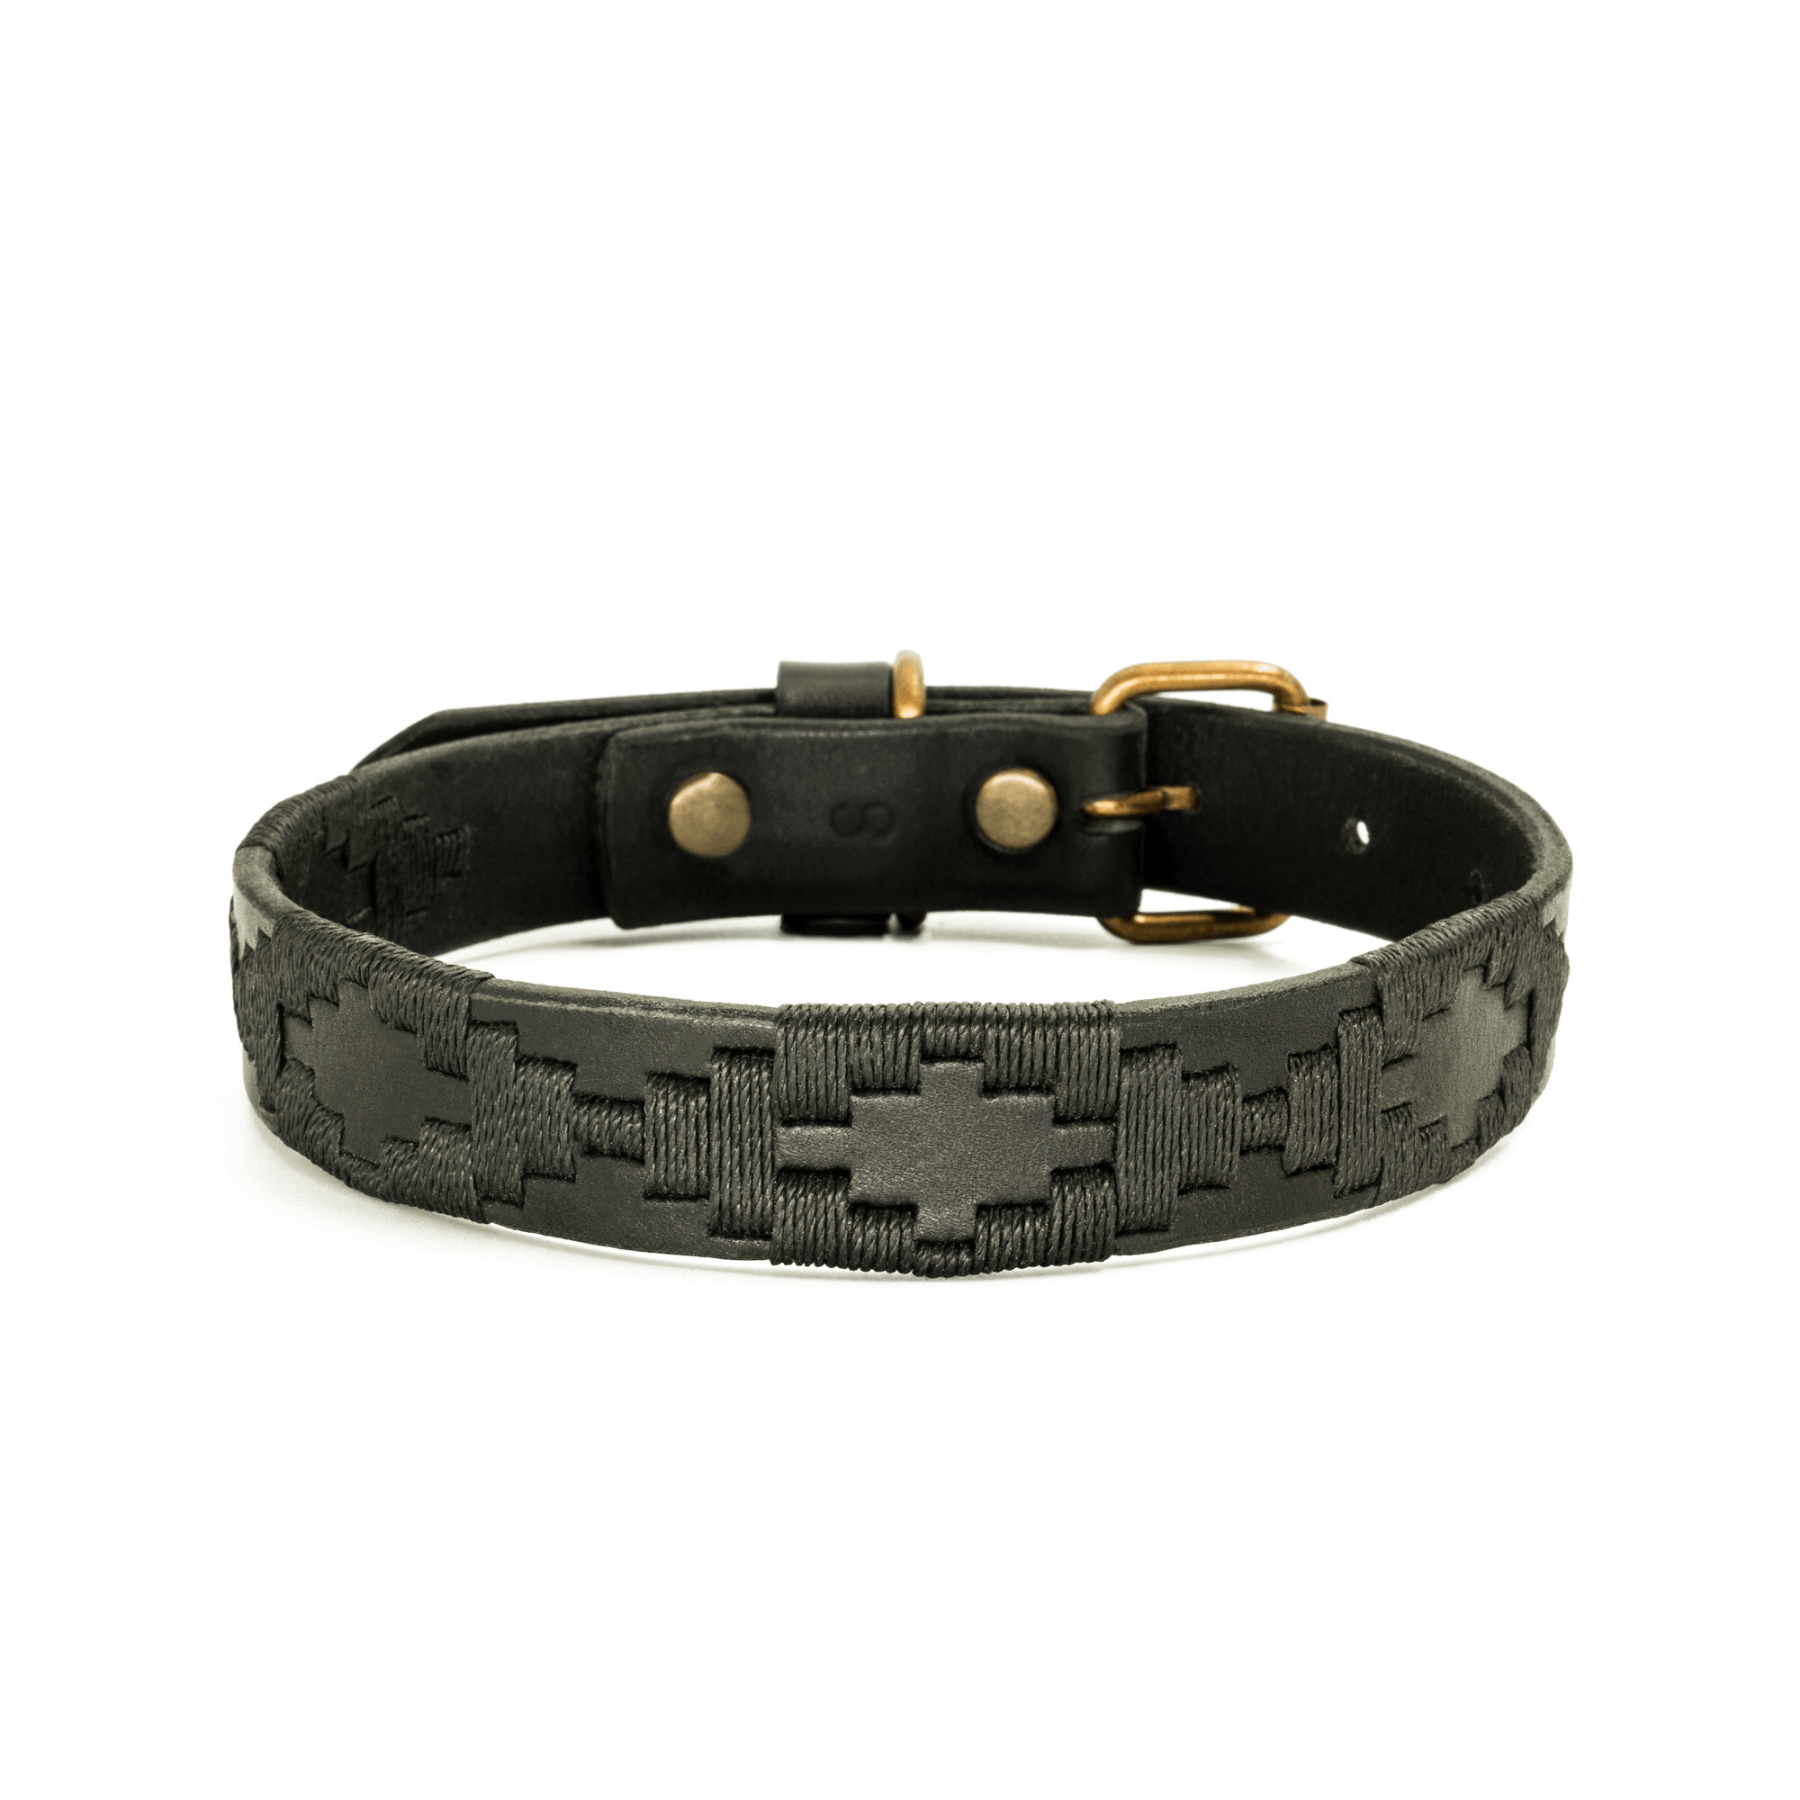 Gaucholife Dogs Embroidered Leather Dog Collar (Black)